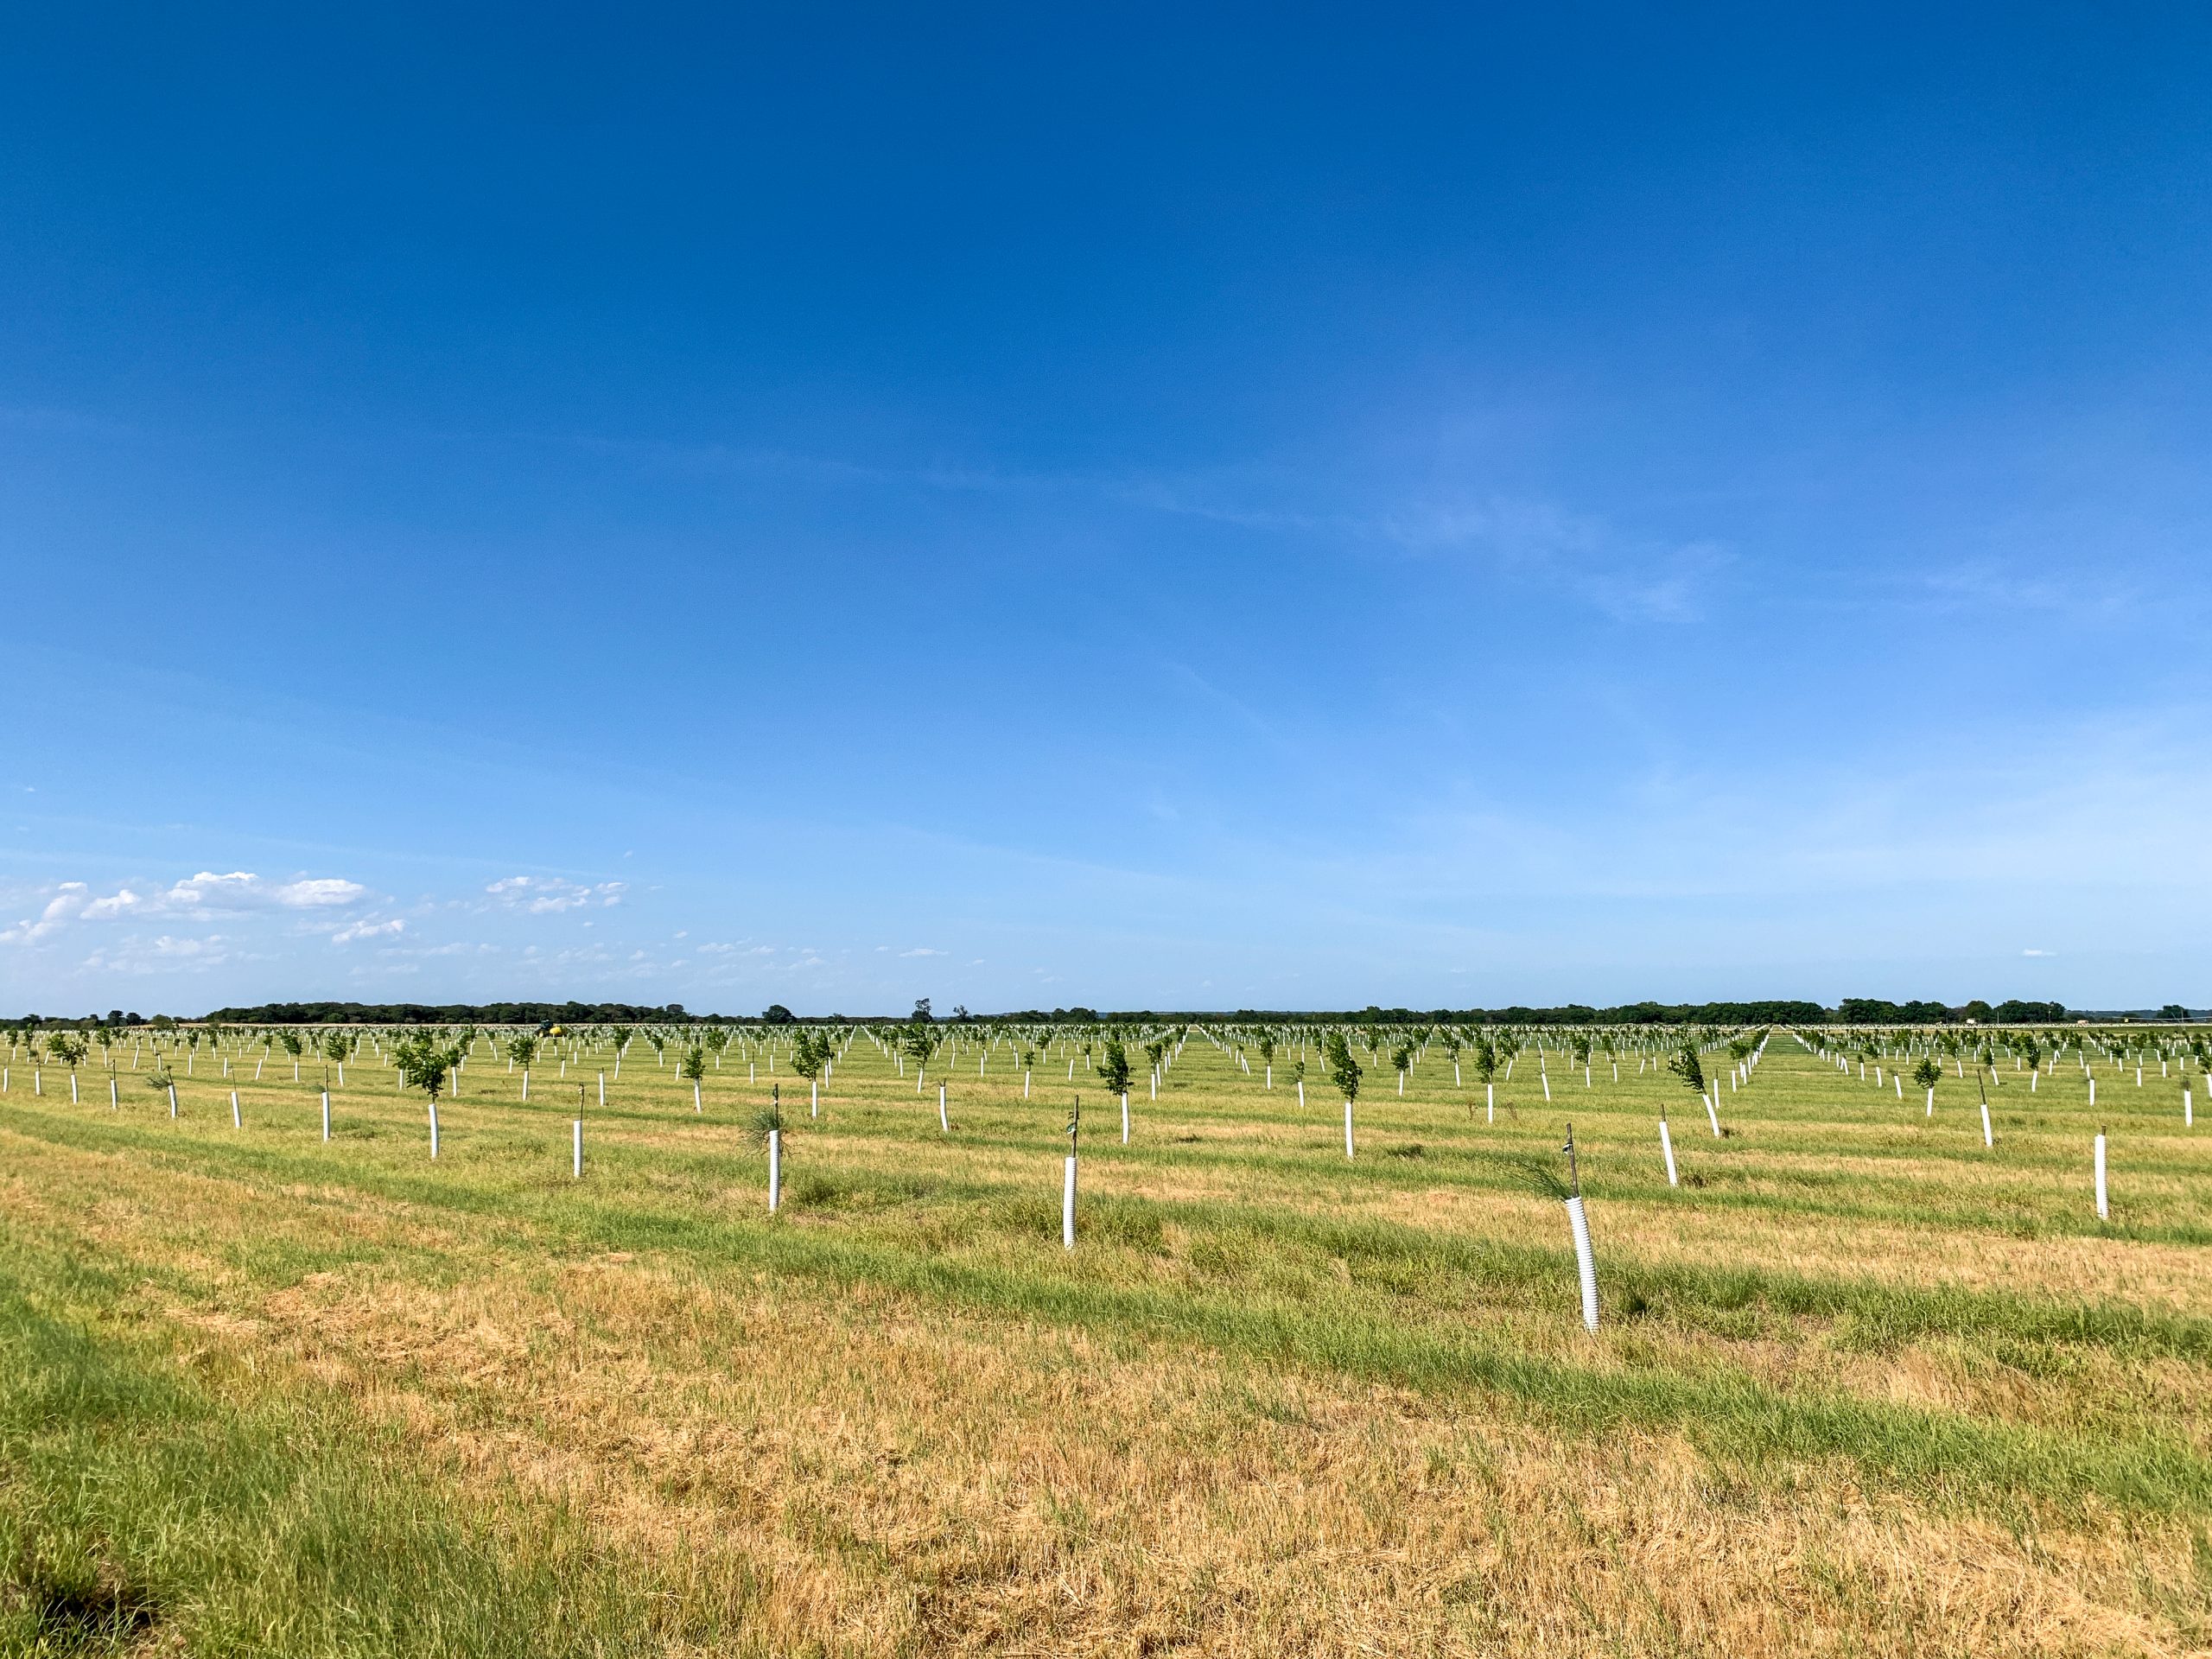 Rows of young pecan trees as far as the eye can see below a bright blue sky at Raptor Ag.